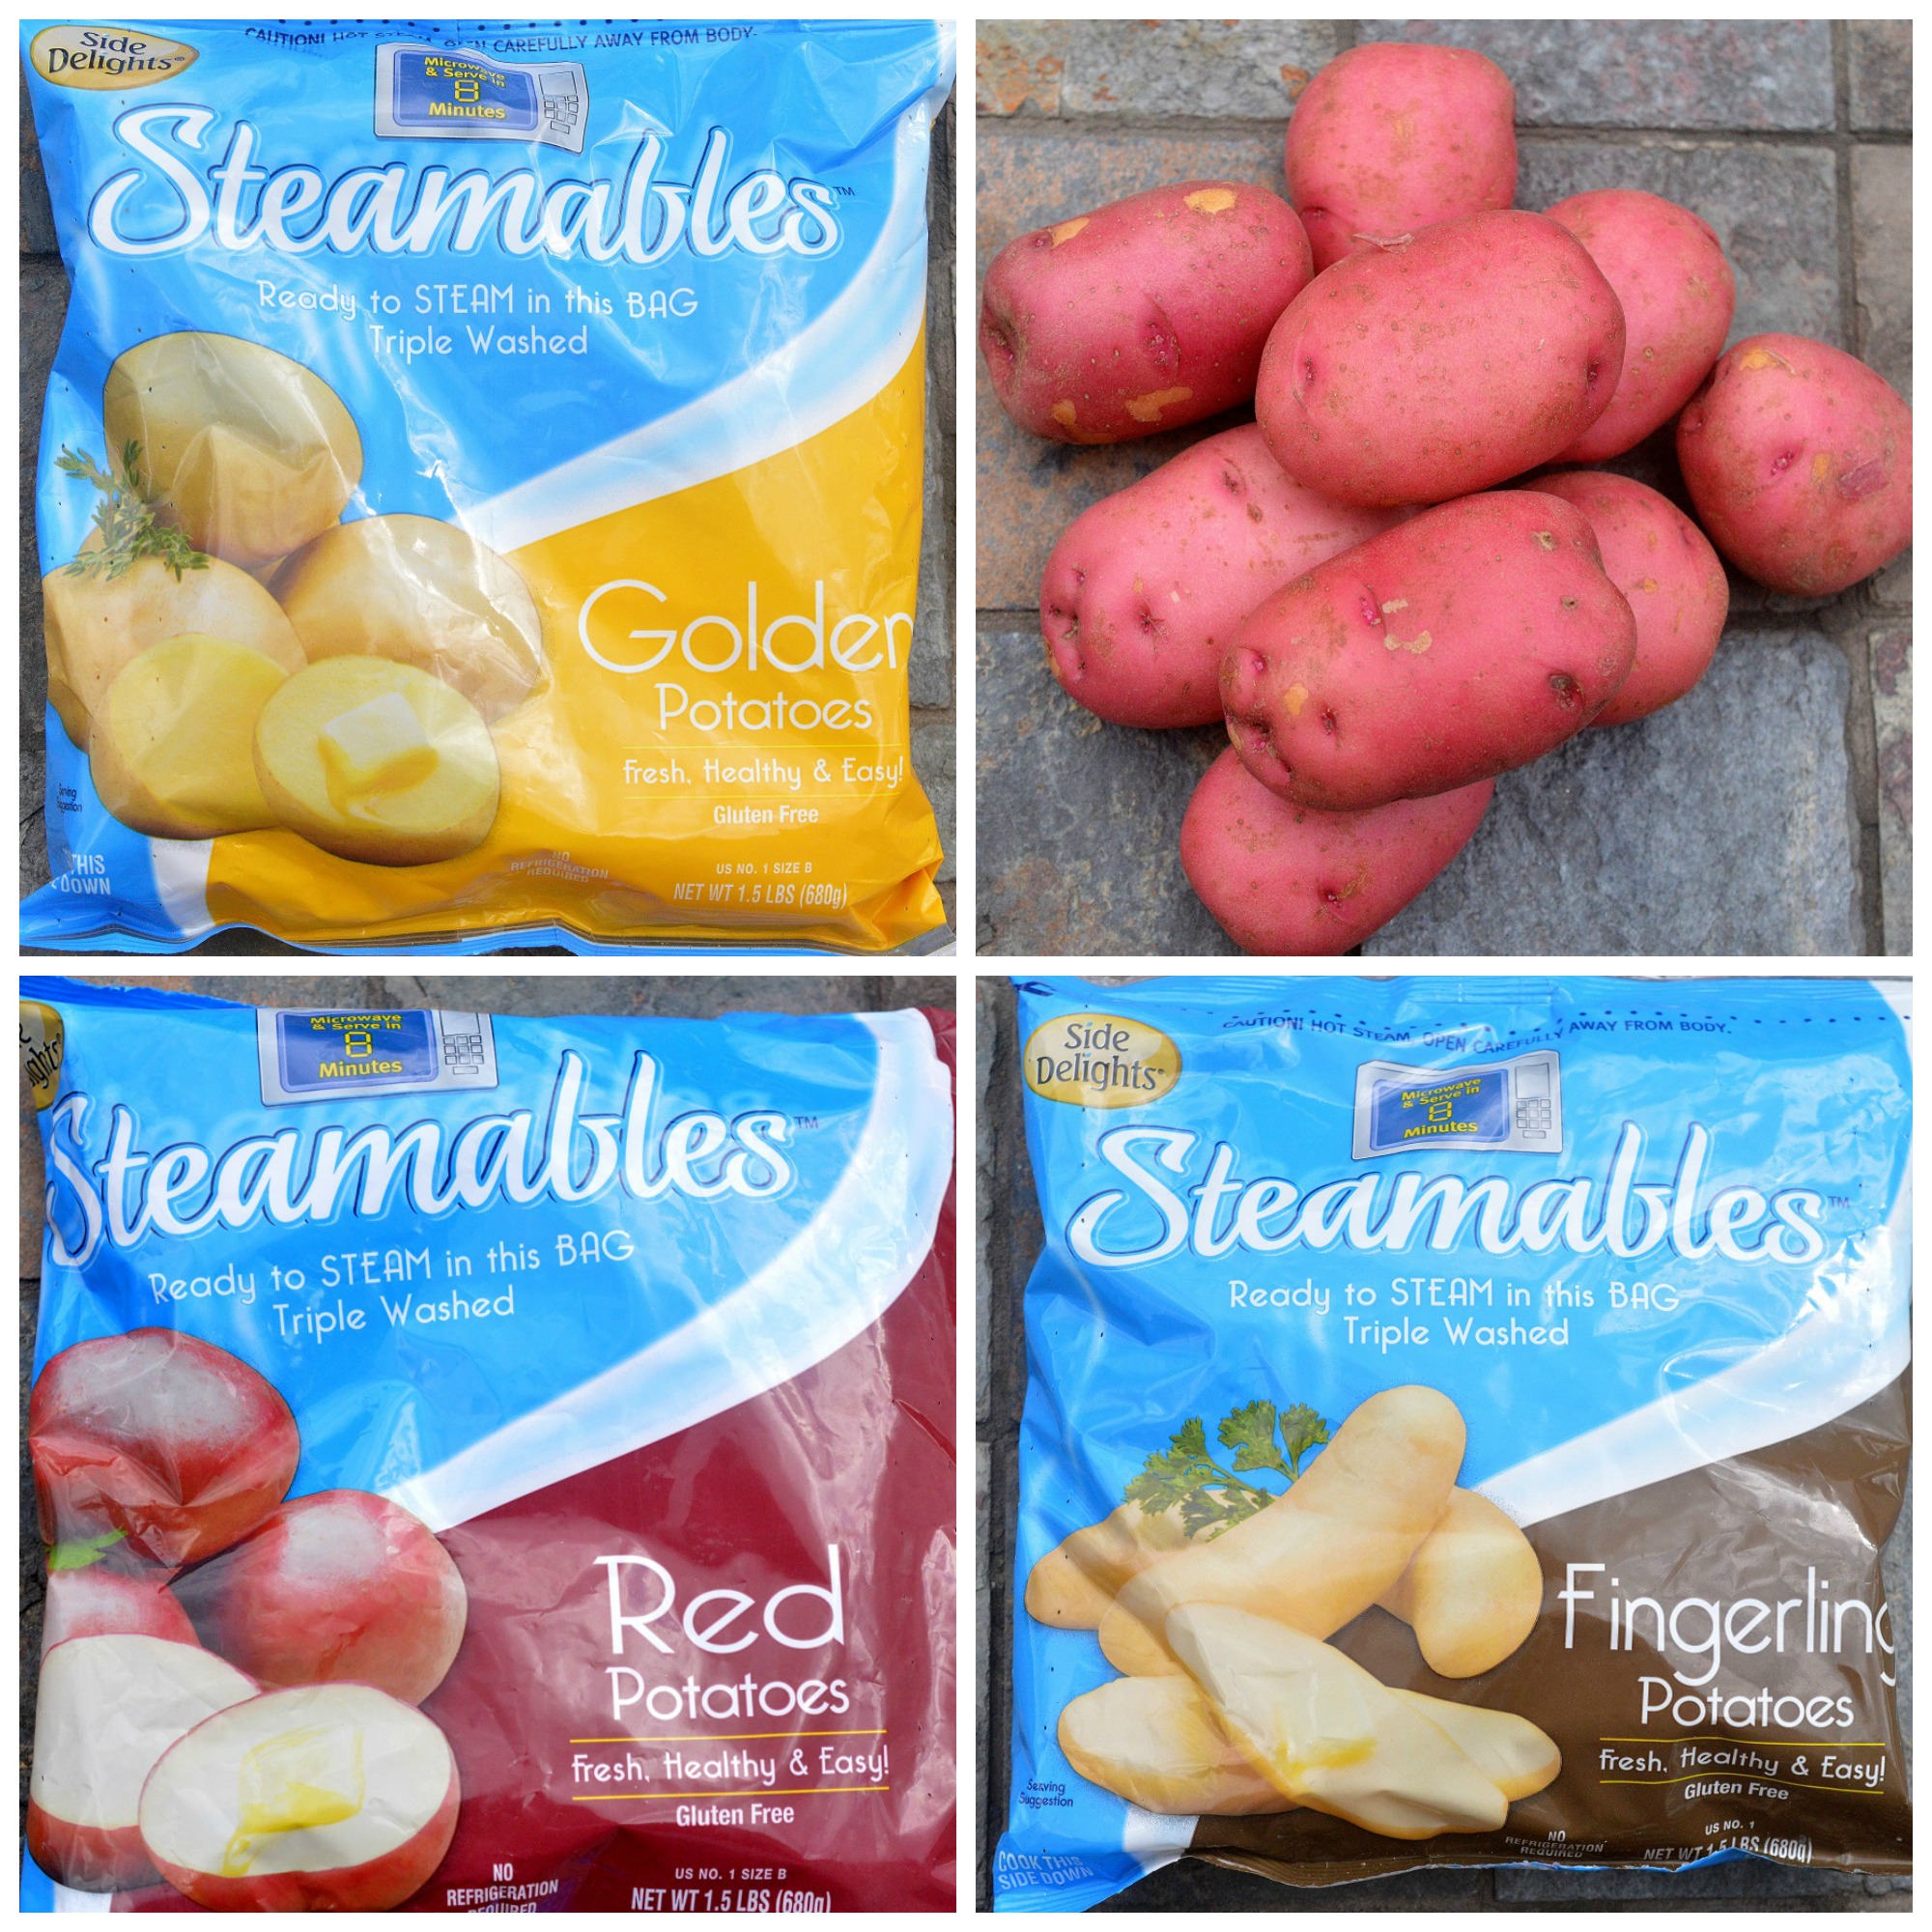 Side Delights Steamables - The easiest way to start any potato dish!